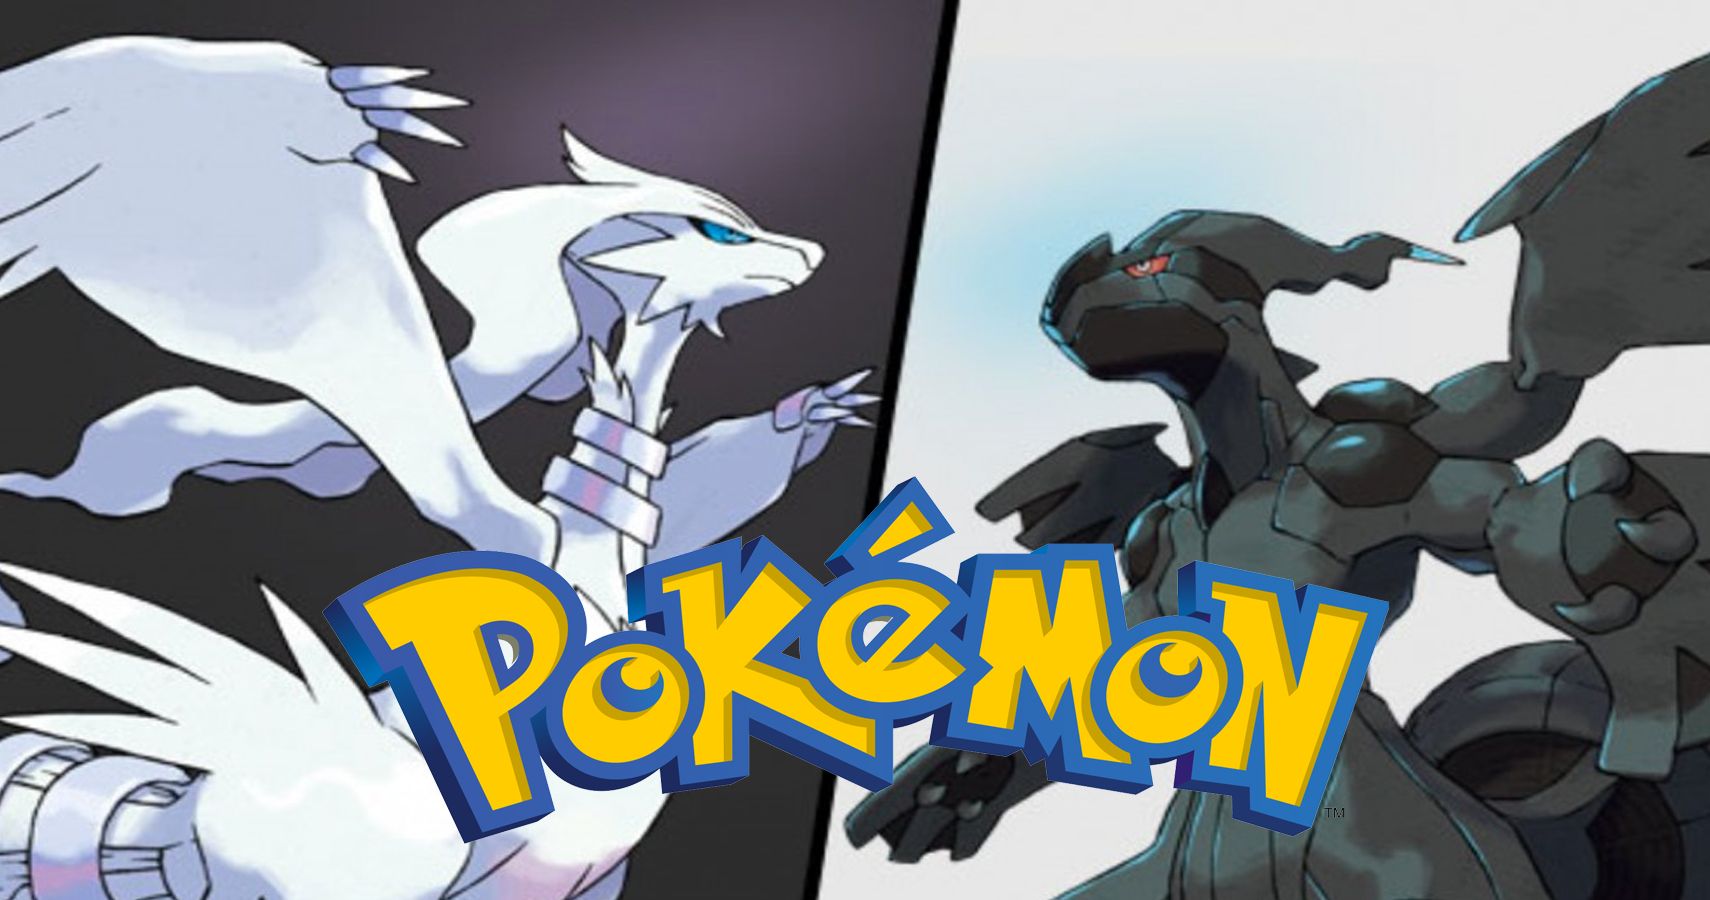 Why Pokémon Black & White Was Hated When It First Released